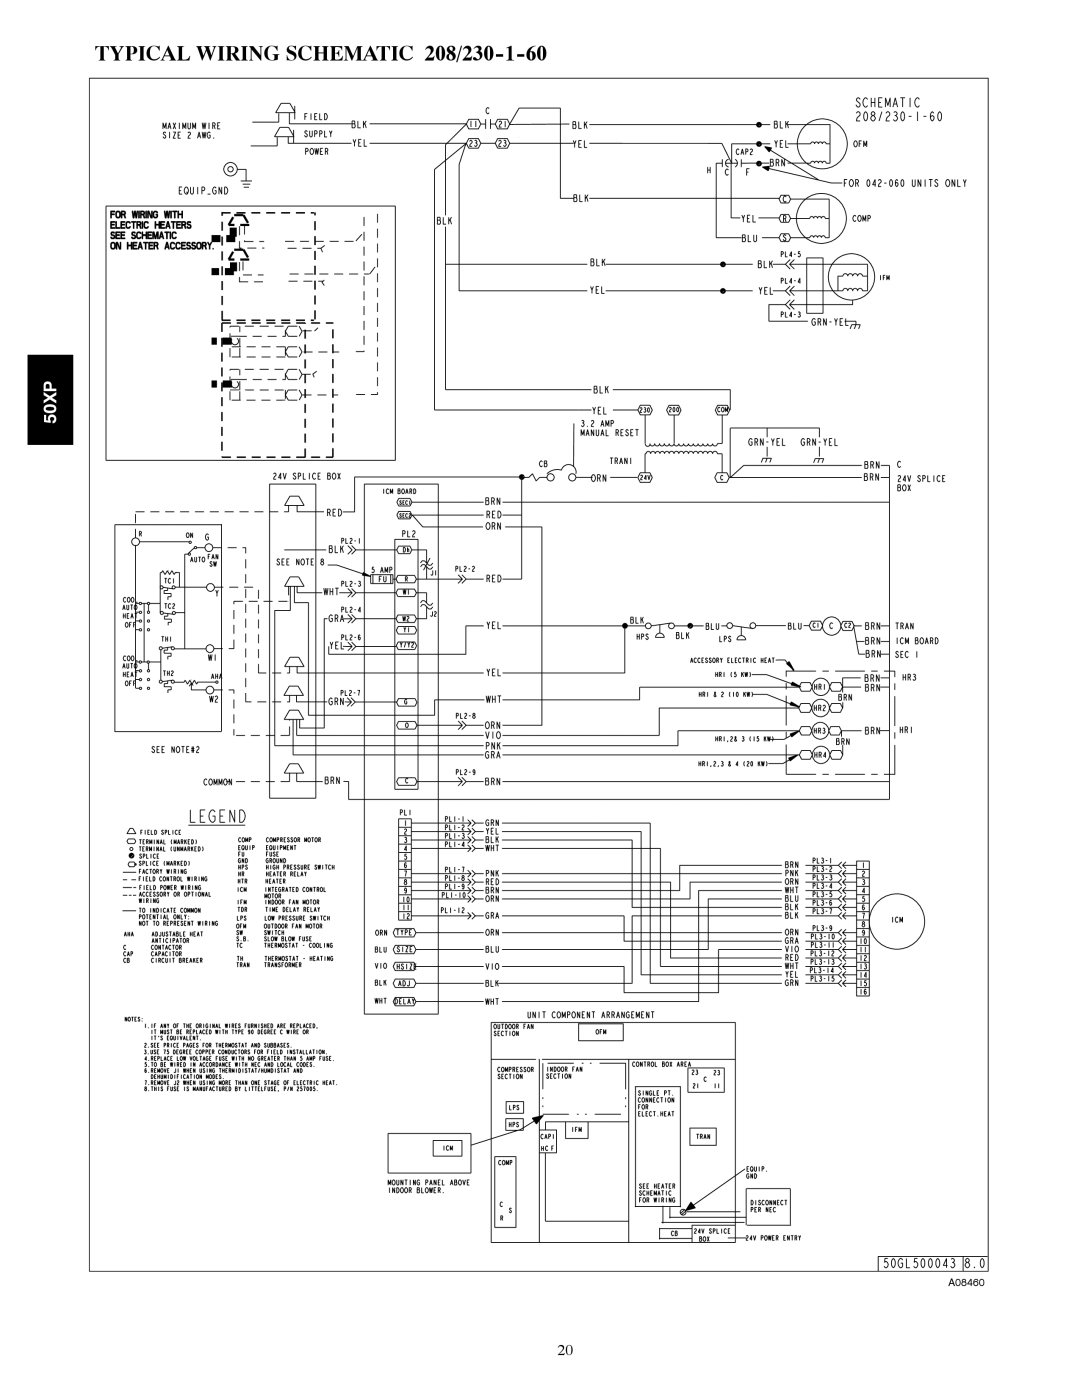 Carrier 50XP manual TYPICAL WIRING SCHEMATIC 208/230-1-60, A08460 